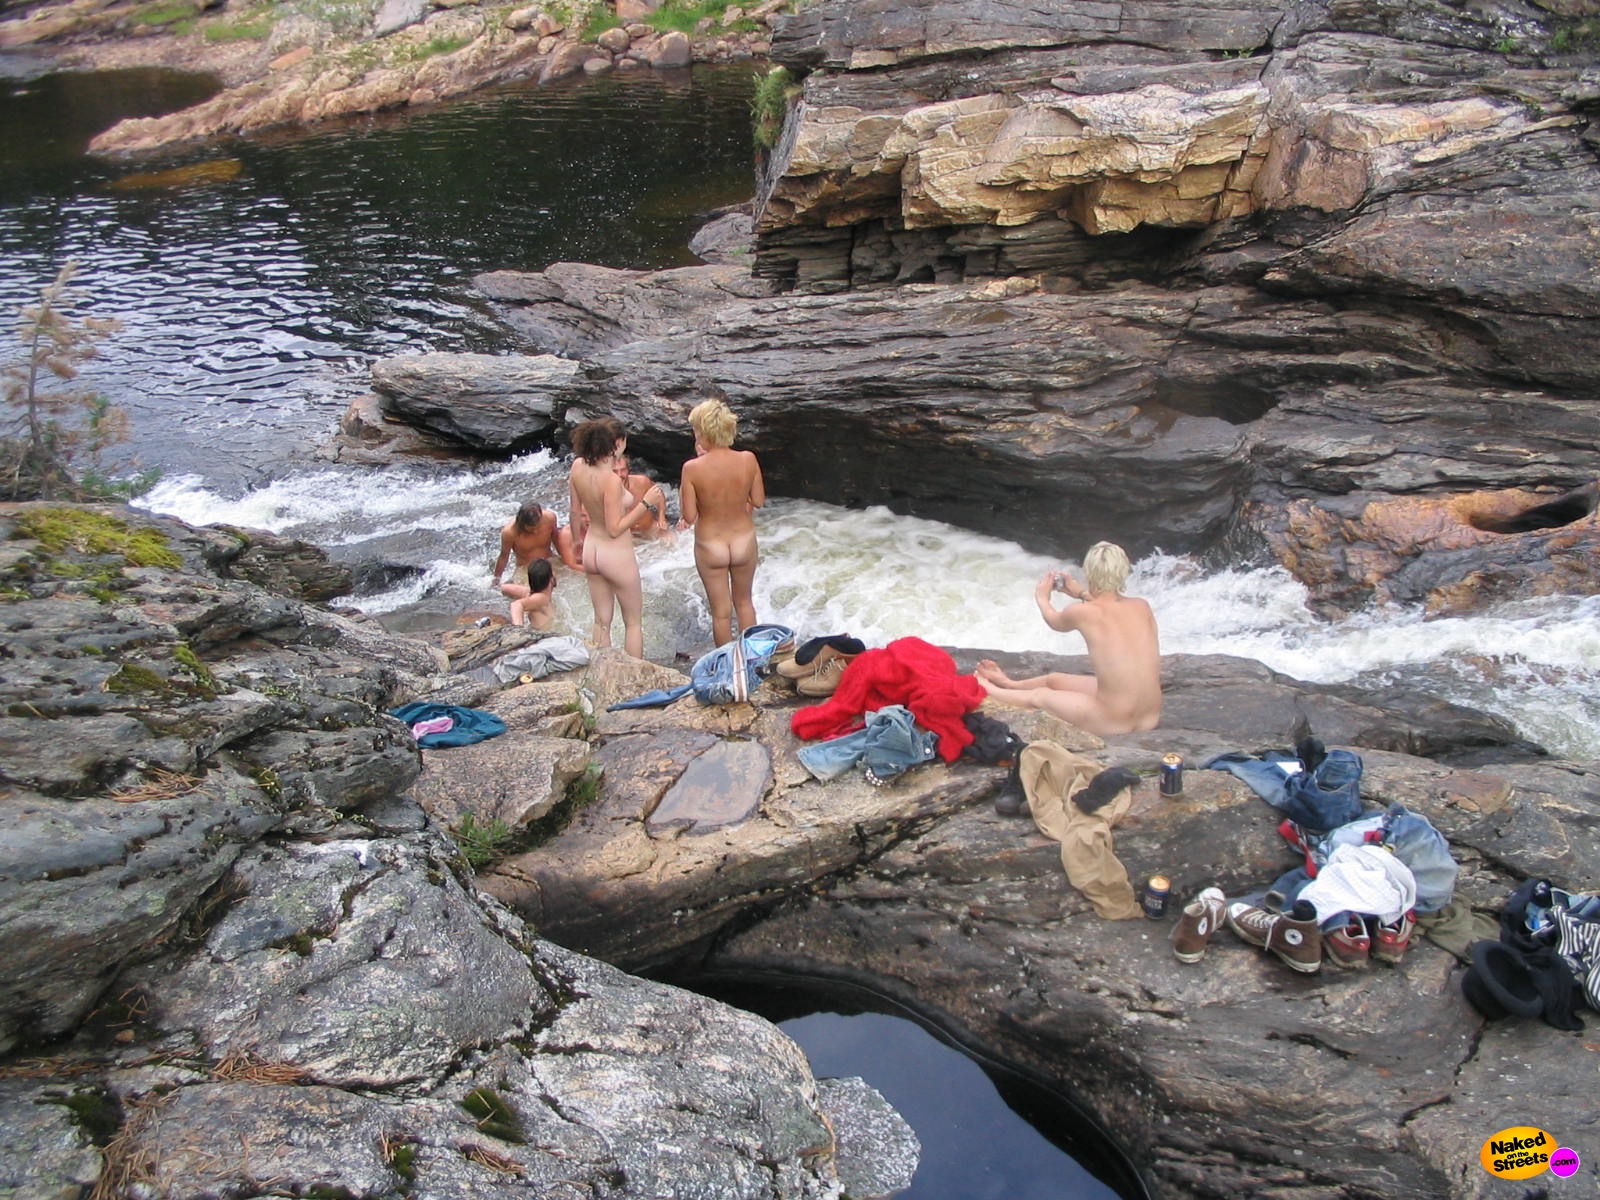 Skinny dipping during hike